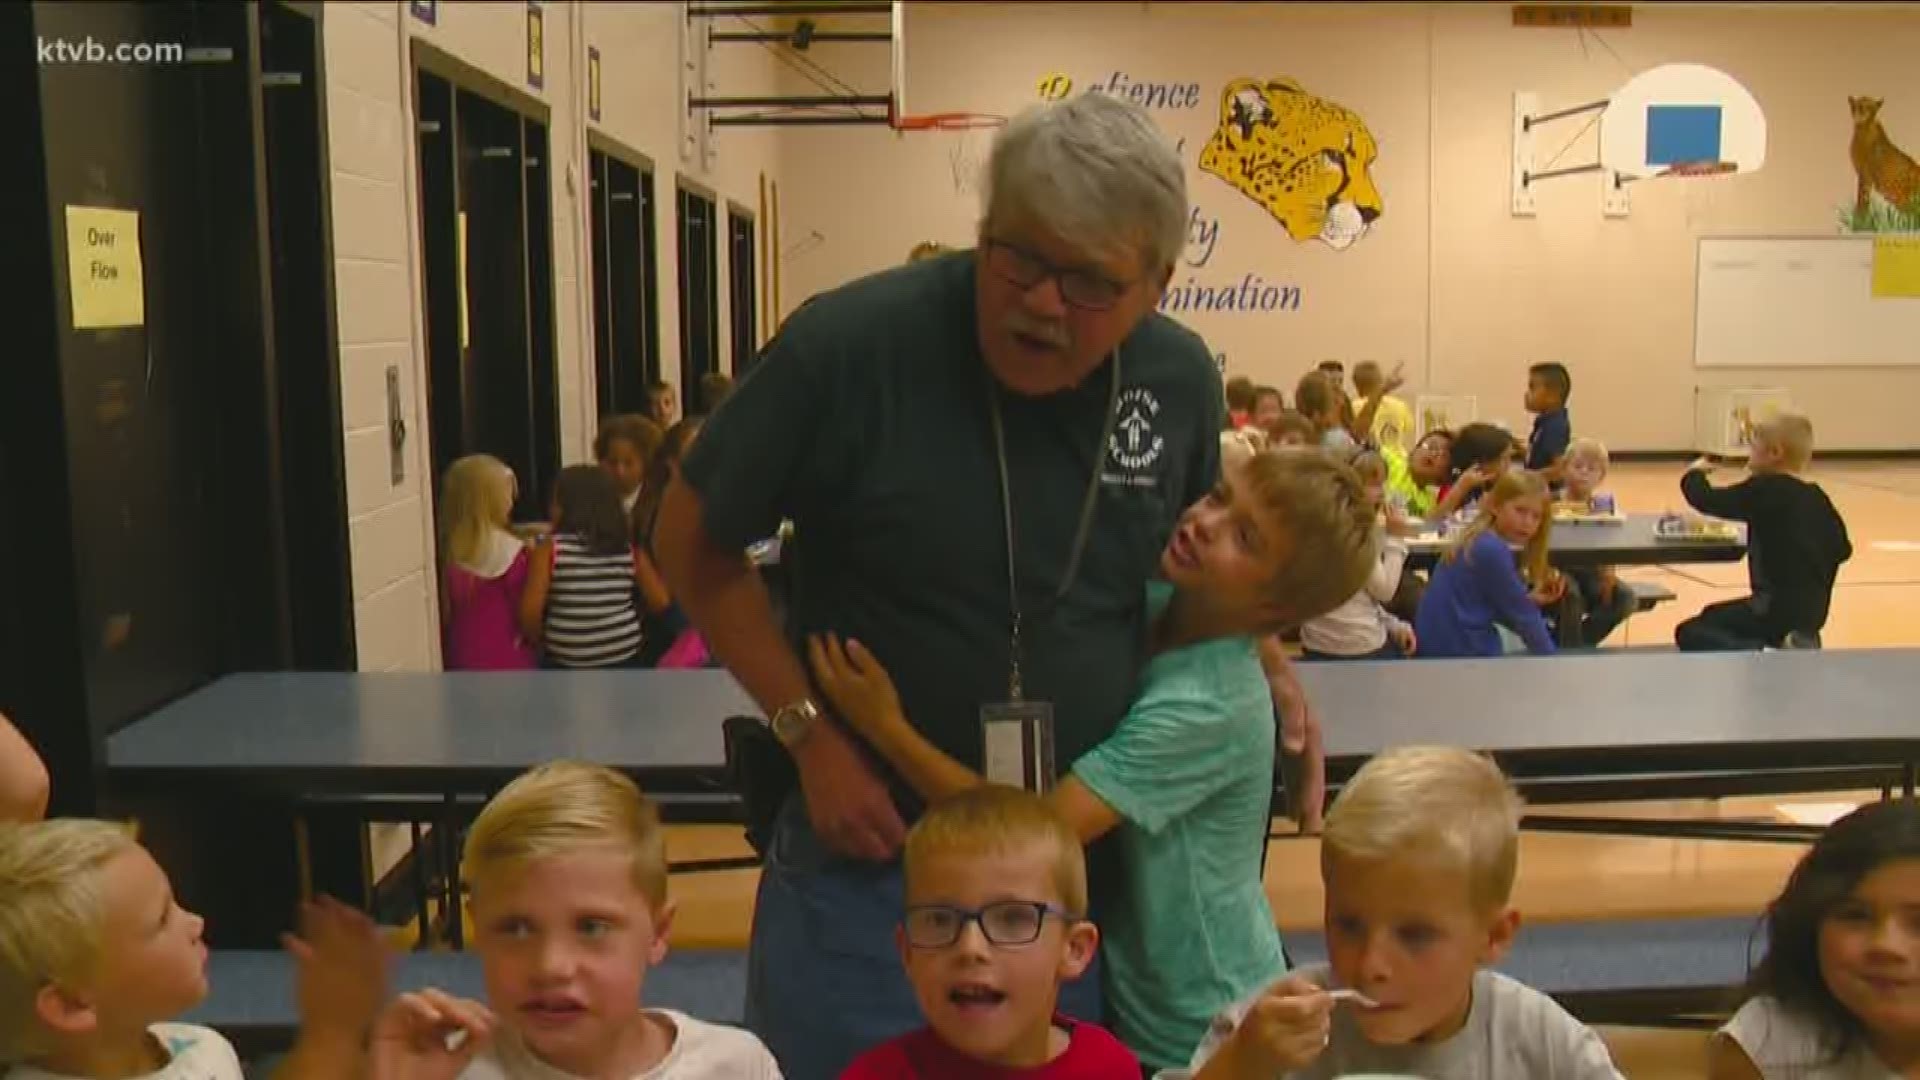 After 43 years at Valley View Elementary School in Boise, head custodian Jerry Richey is about to retire. Students and teachers say they will always remember his kindness and the positive impact he's had on their lives.